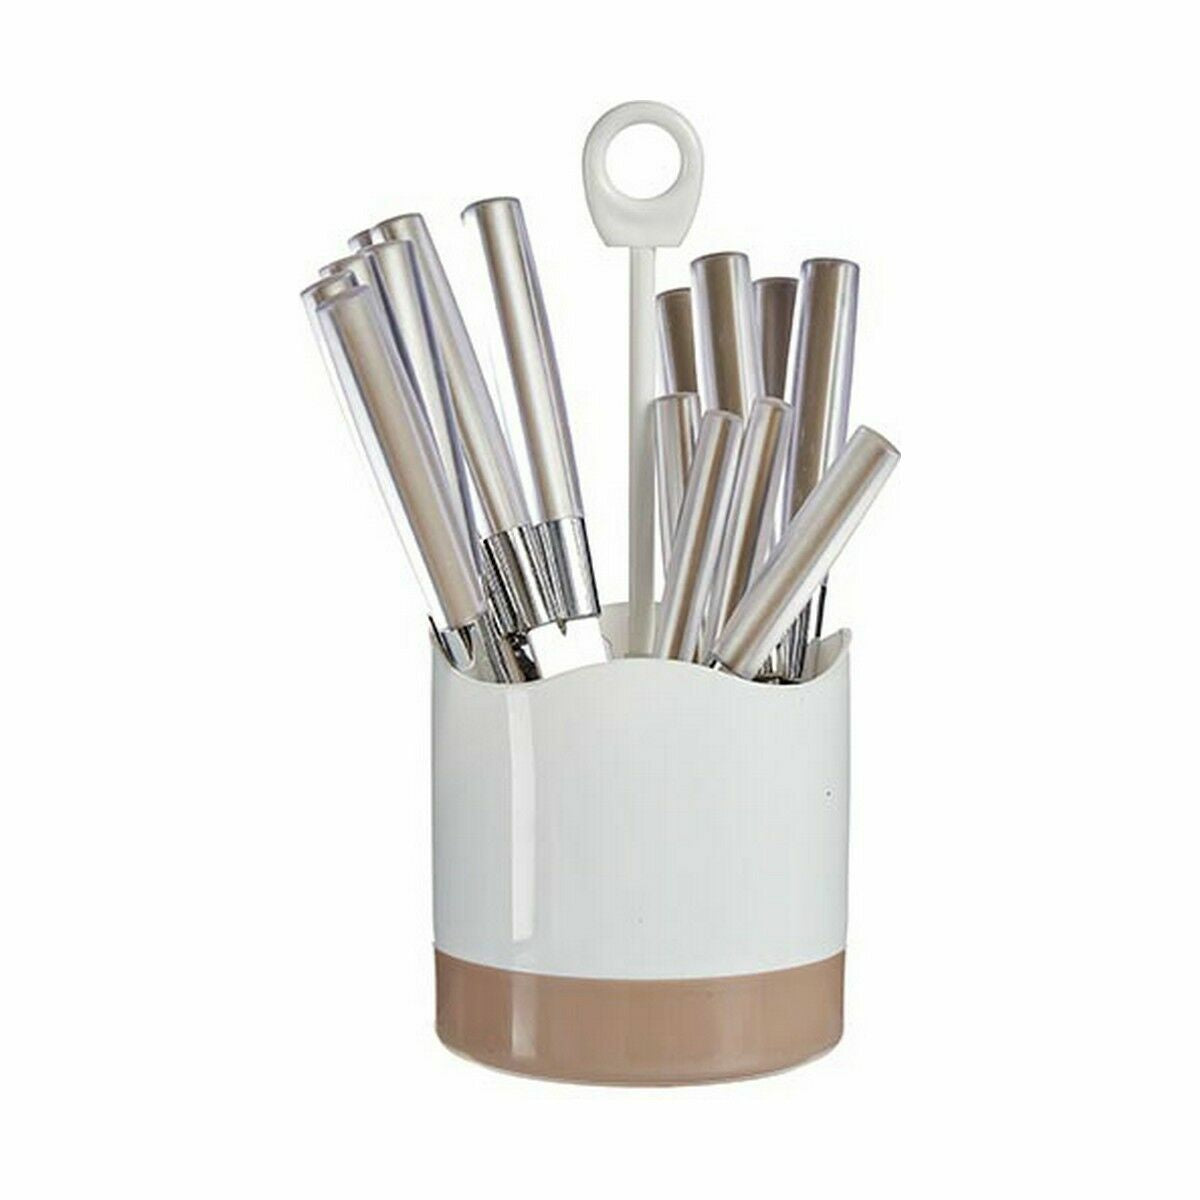 Cutlery Set Brown Stainless steel (8 Units)